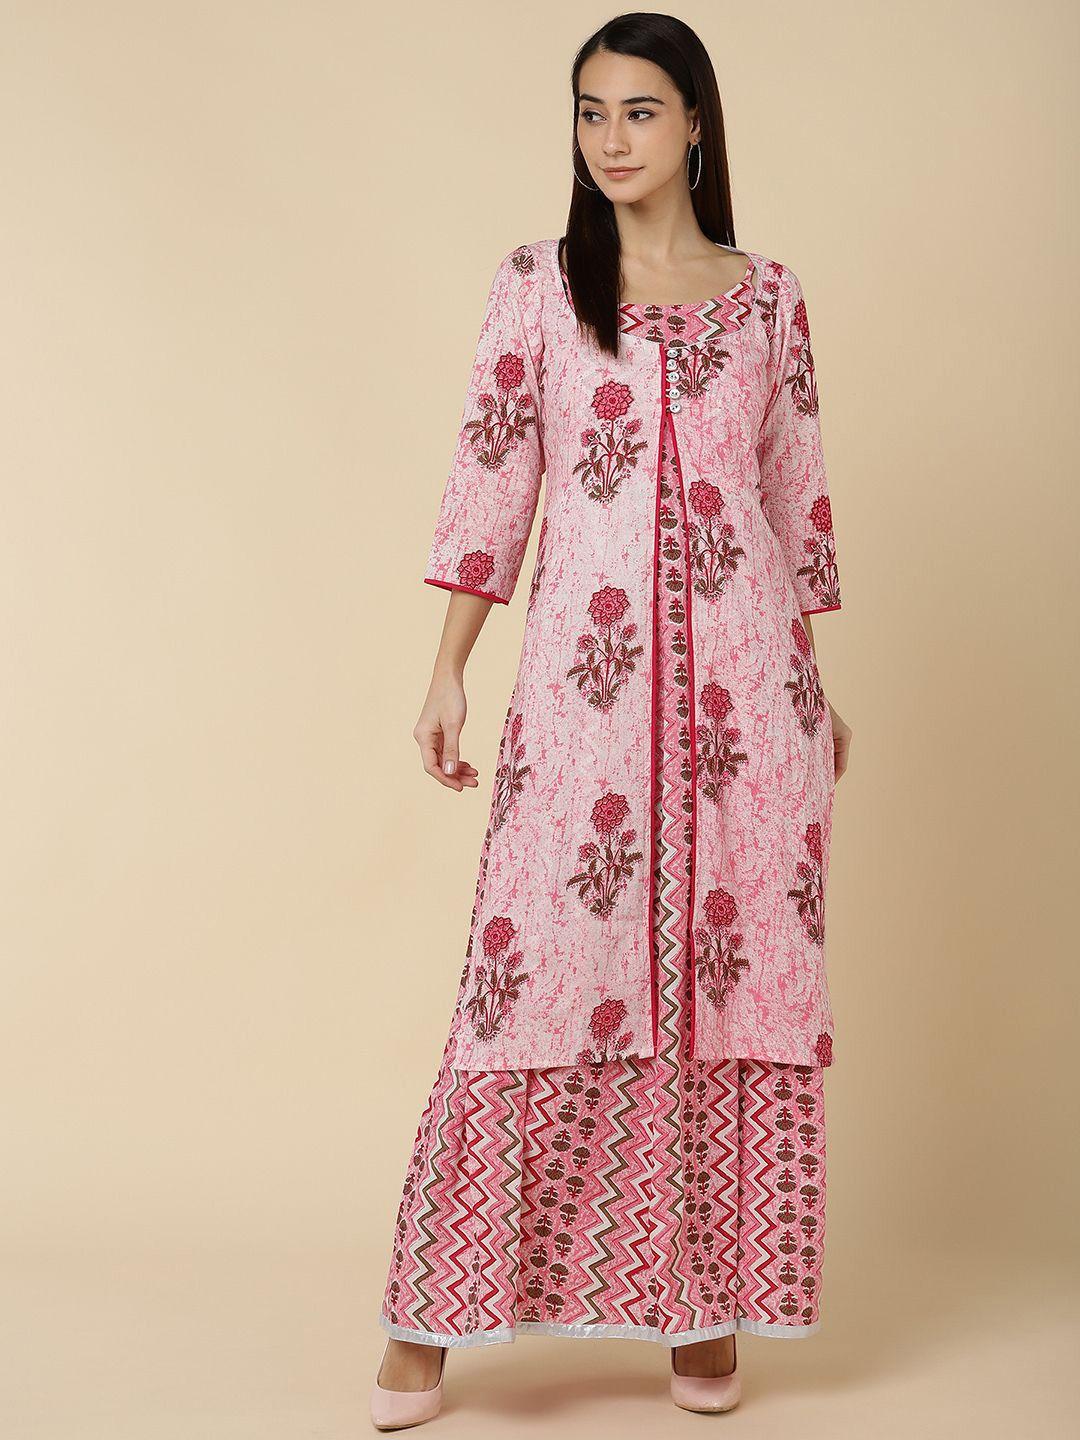 vedana floral printed cotton maxi dress with jacket